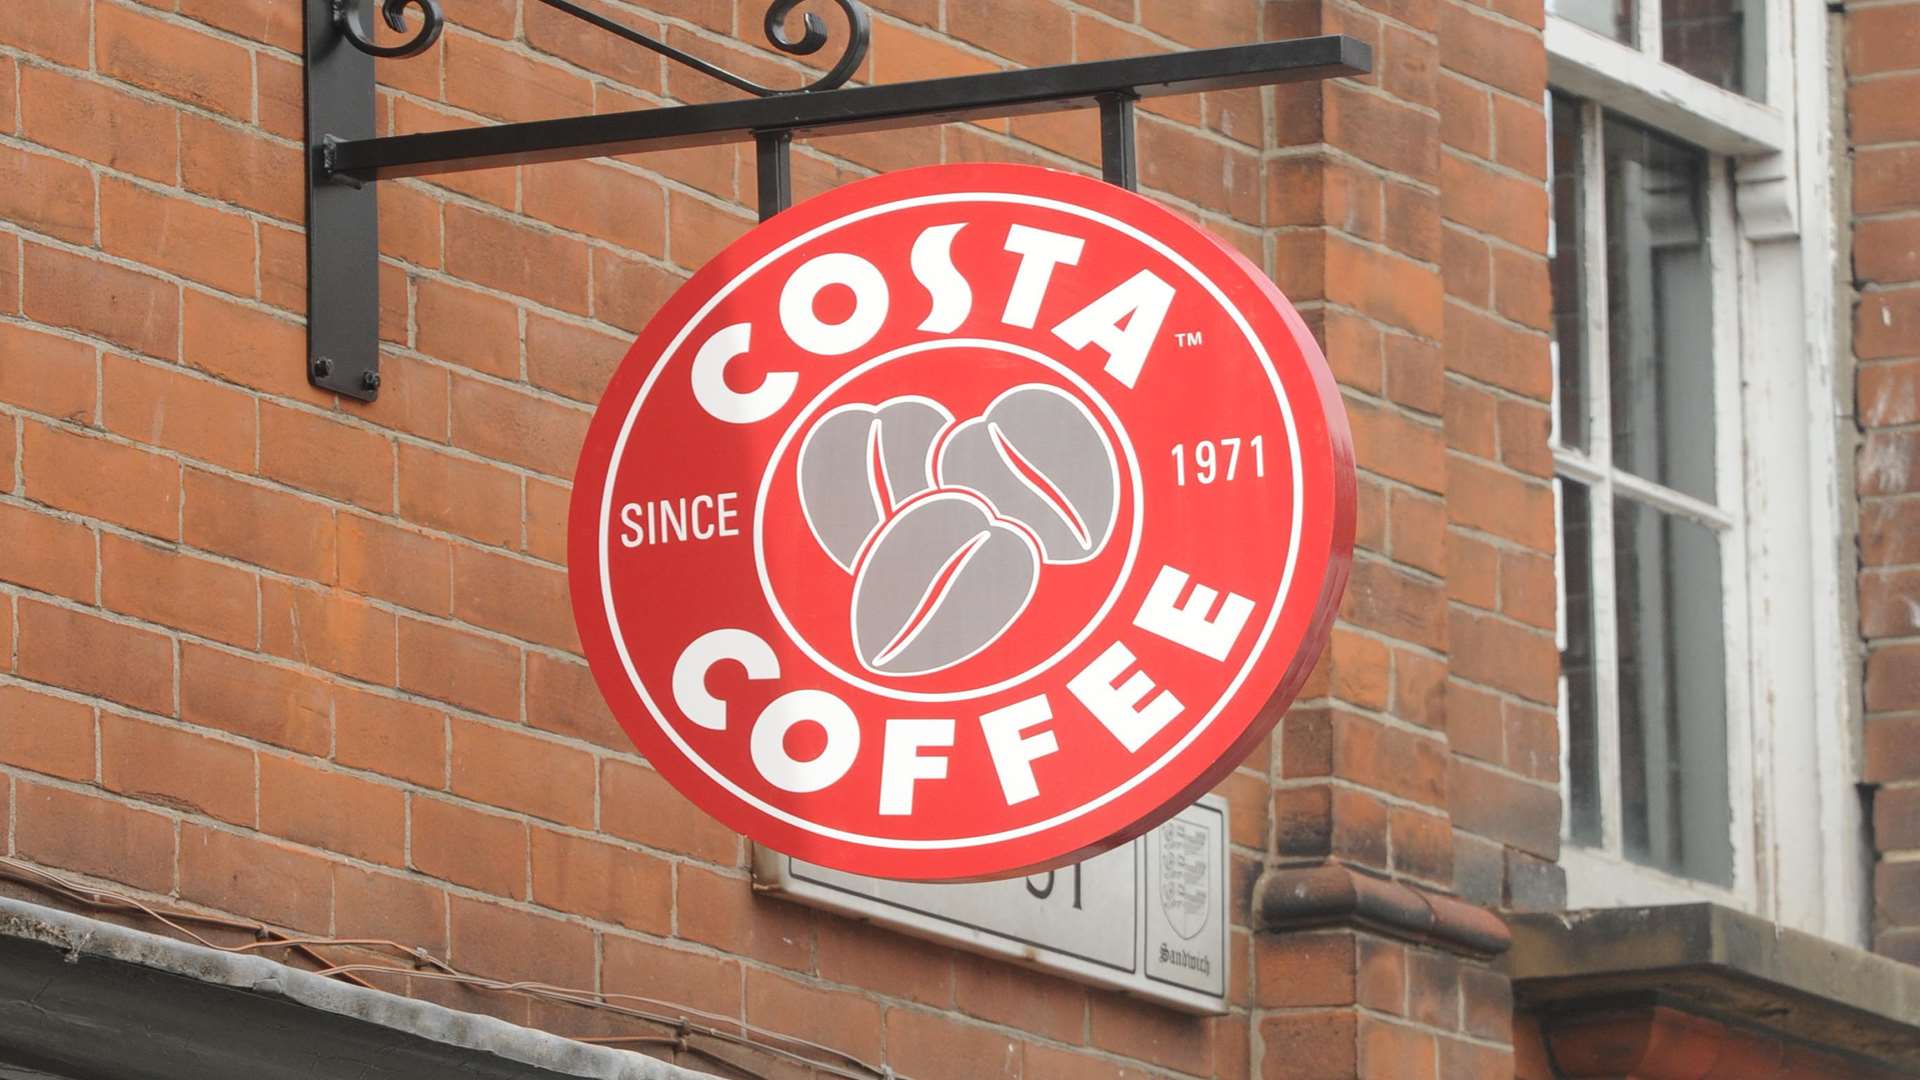 Southeastern passengers have been given Costa Coffee vouchers as an apology for disrupted services